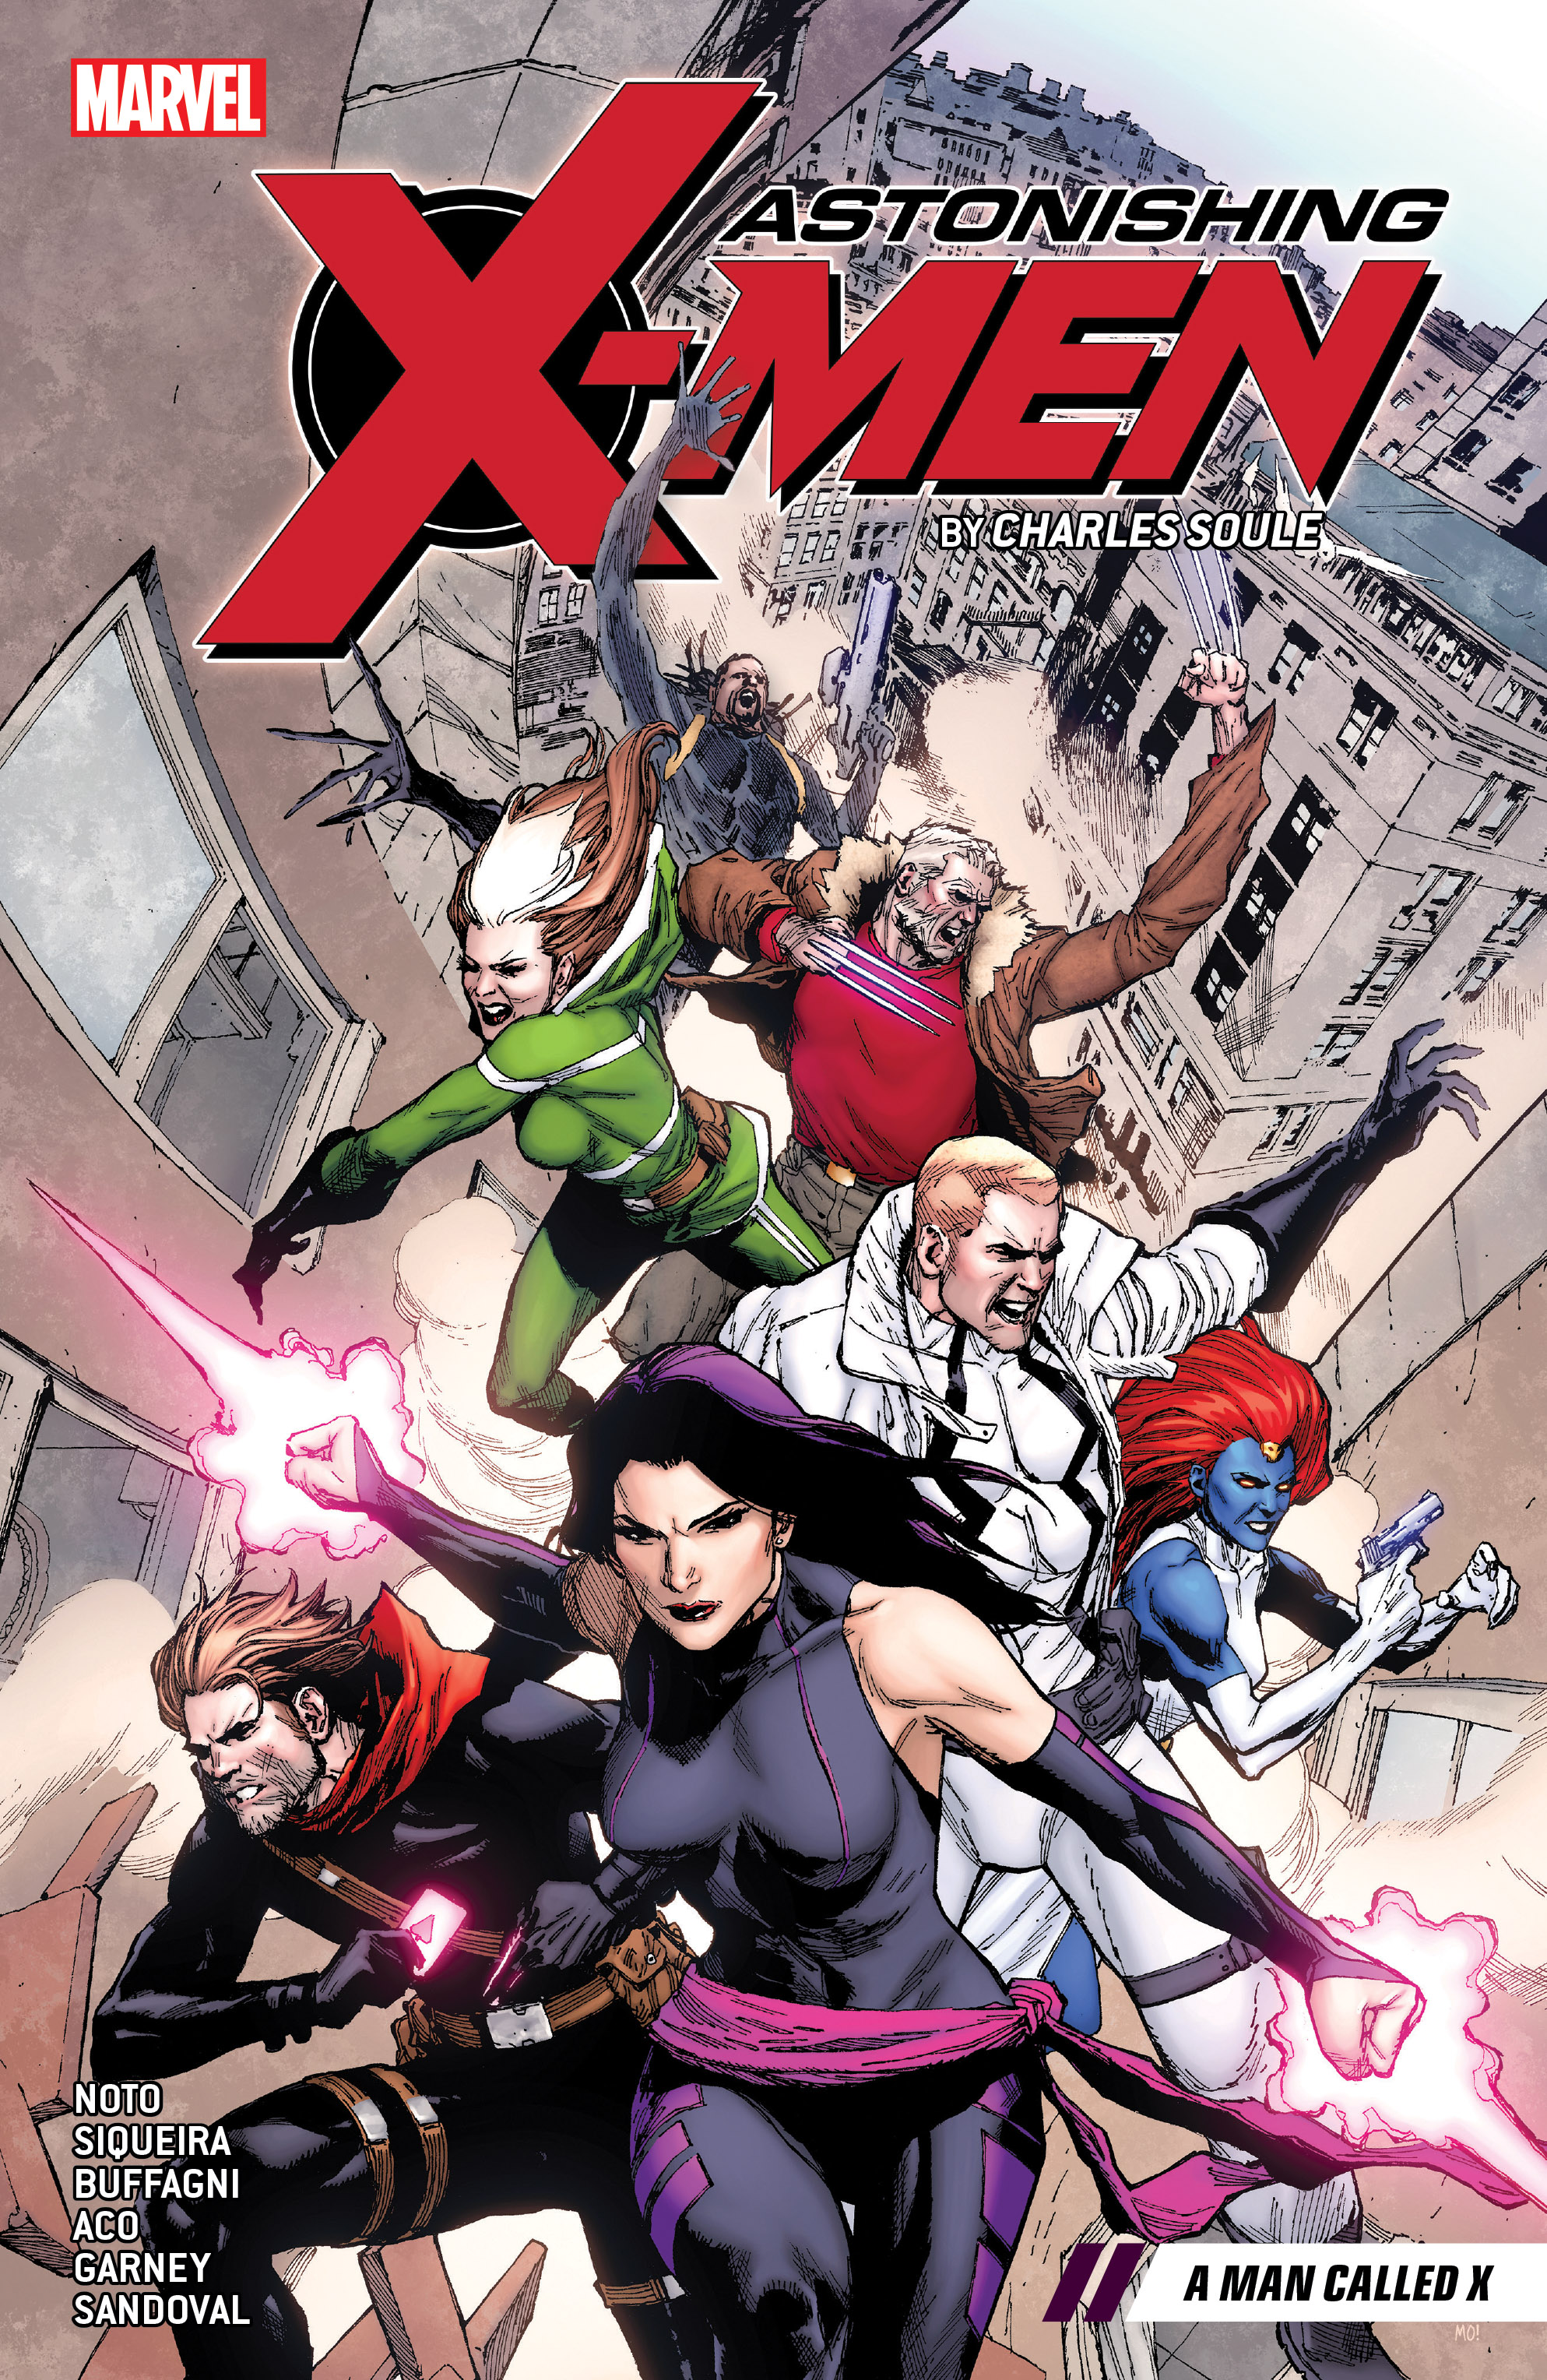 Astonishing X-Men By Charles Soule Vol. 2: A Man Called X (Trade Paperback)